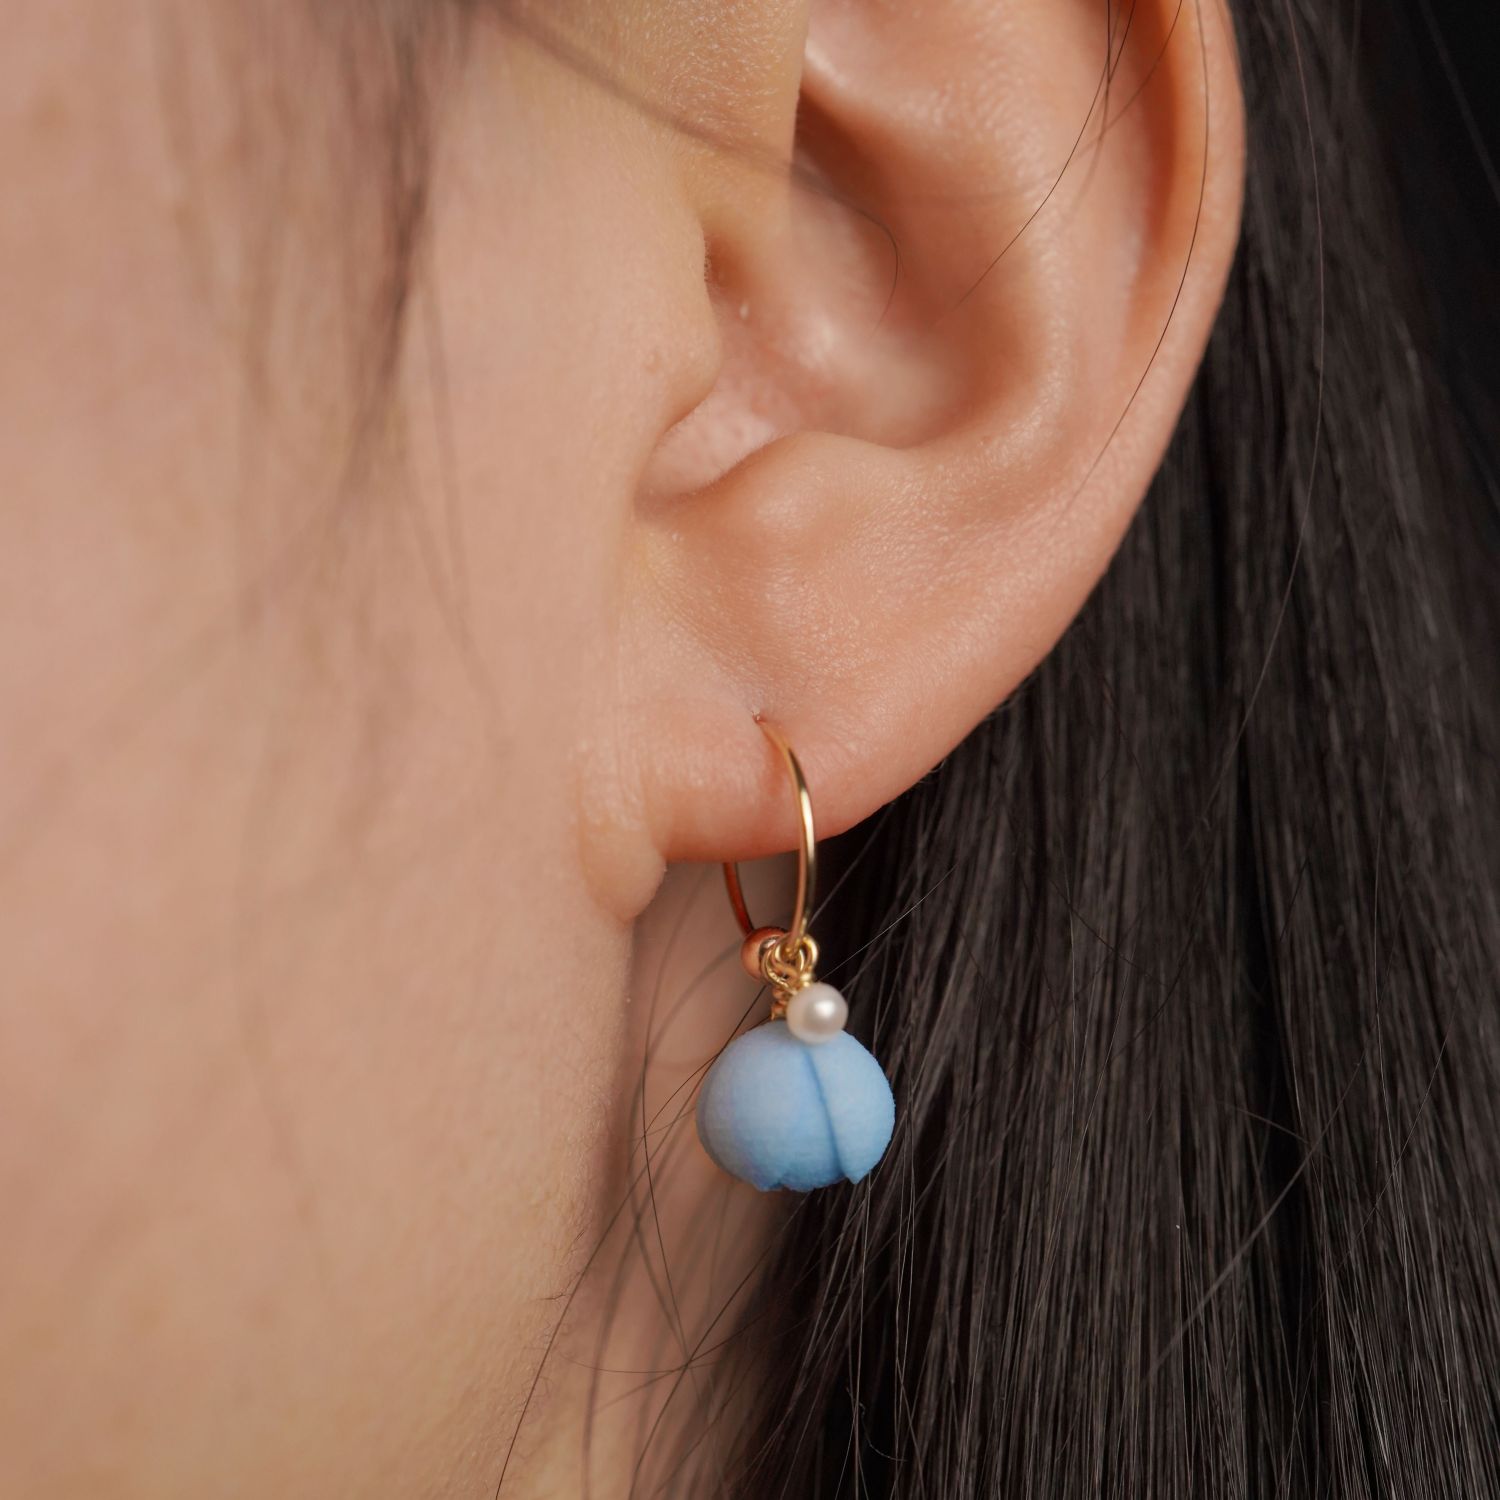 Temino Jewellery: Small Bud Earrings in Blue Product Image 1 of 2